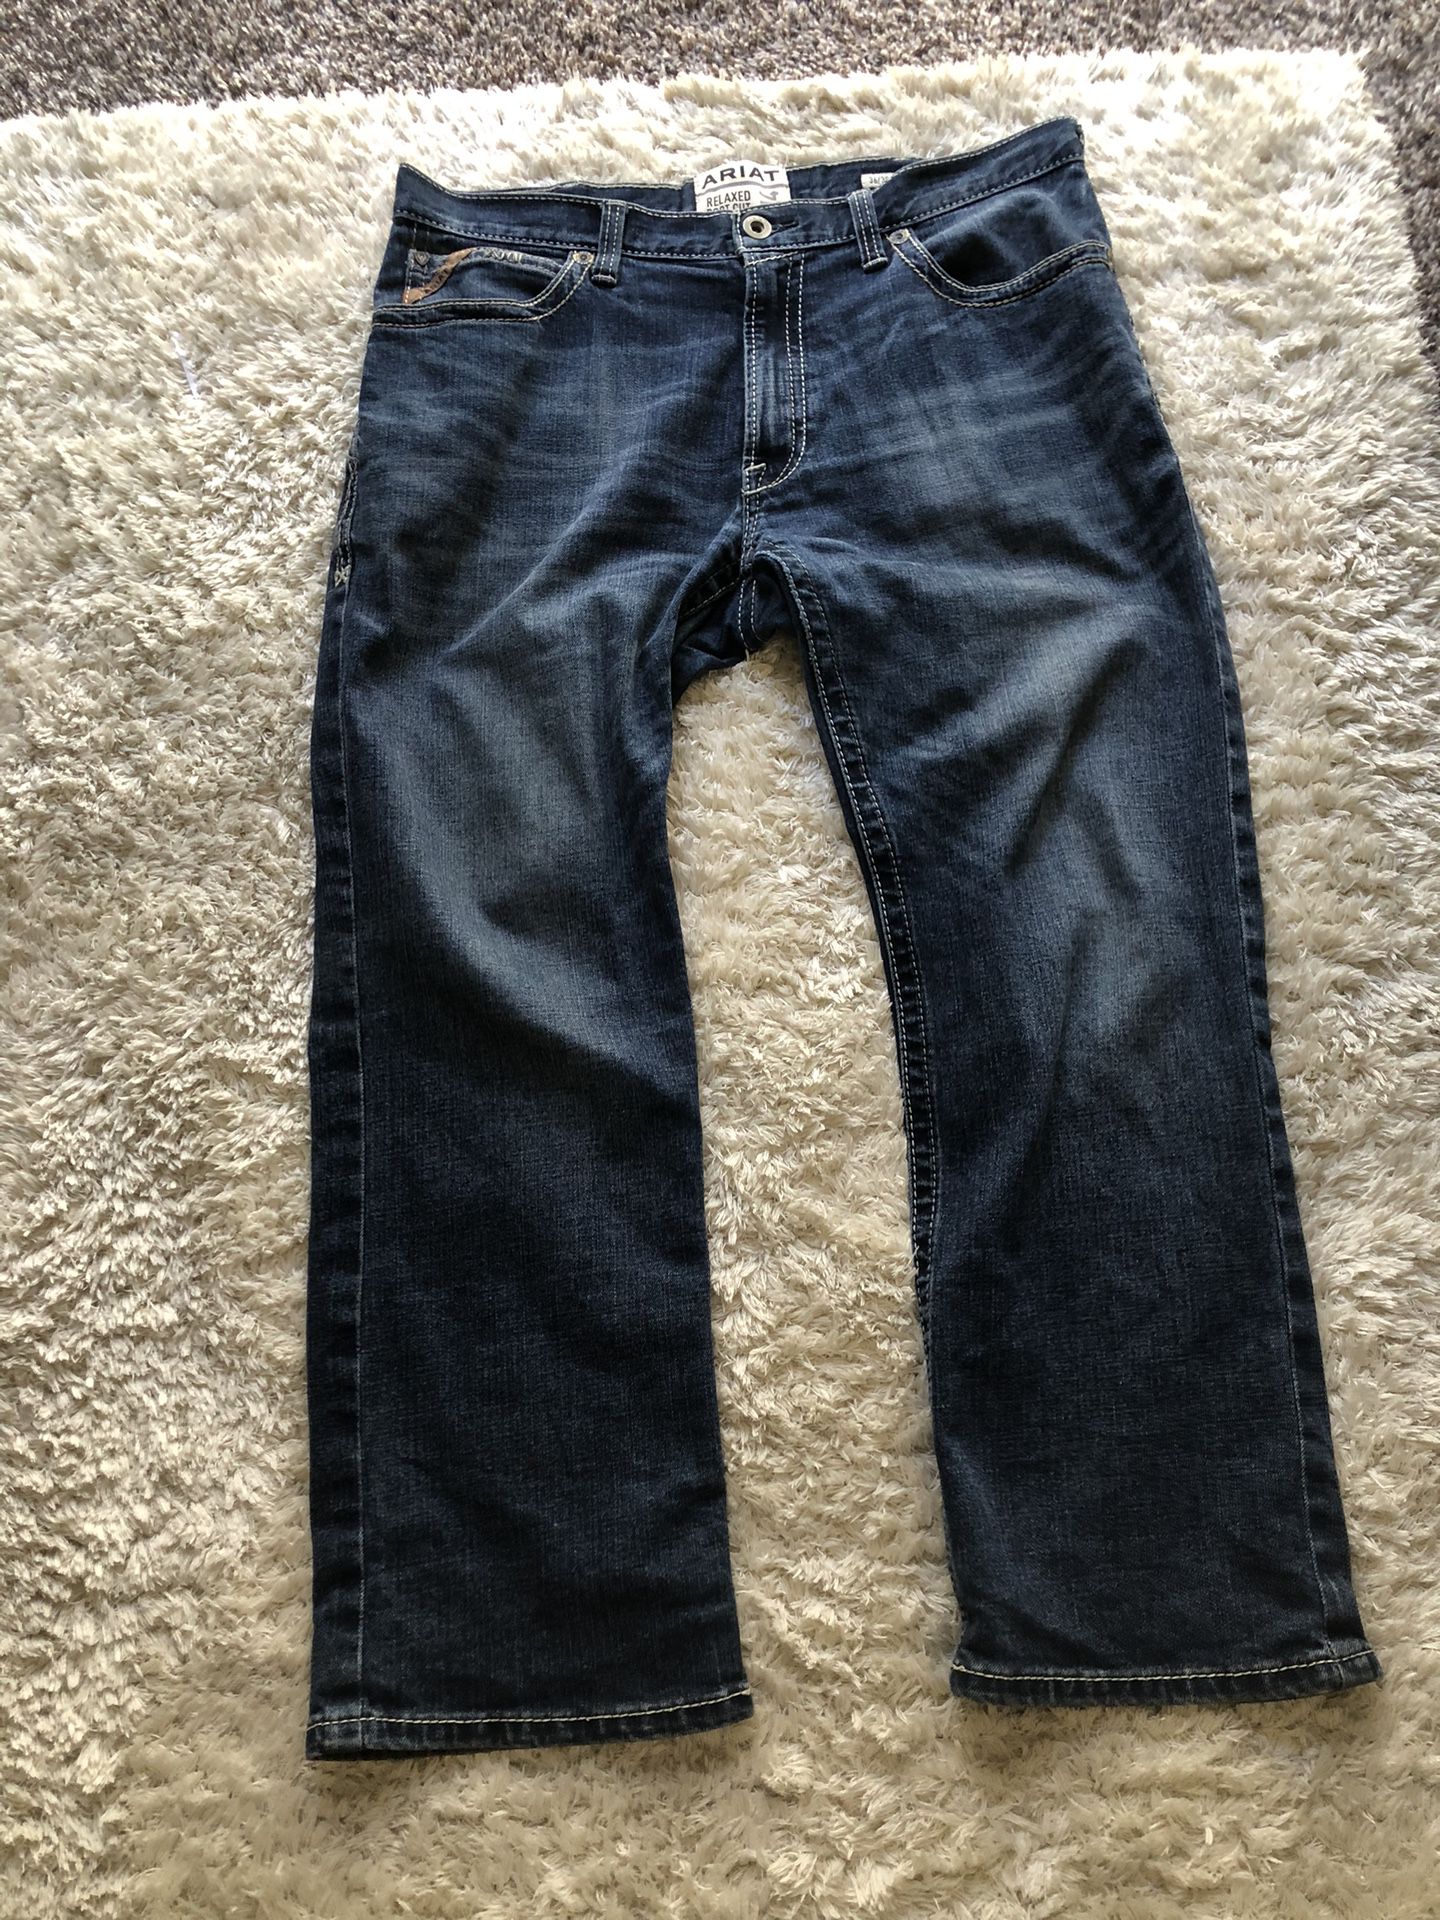 Ariat Work Jeans M4 Series Relaxed Boot Cut 36x30